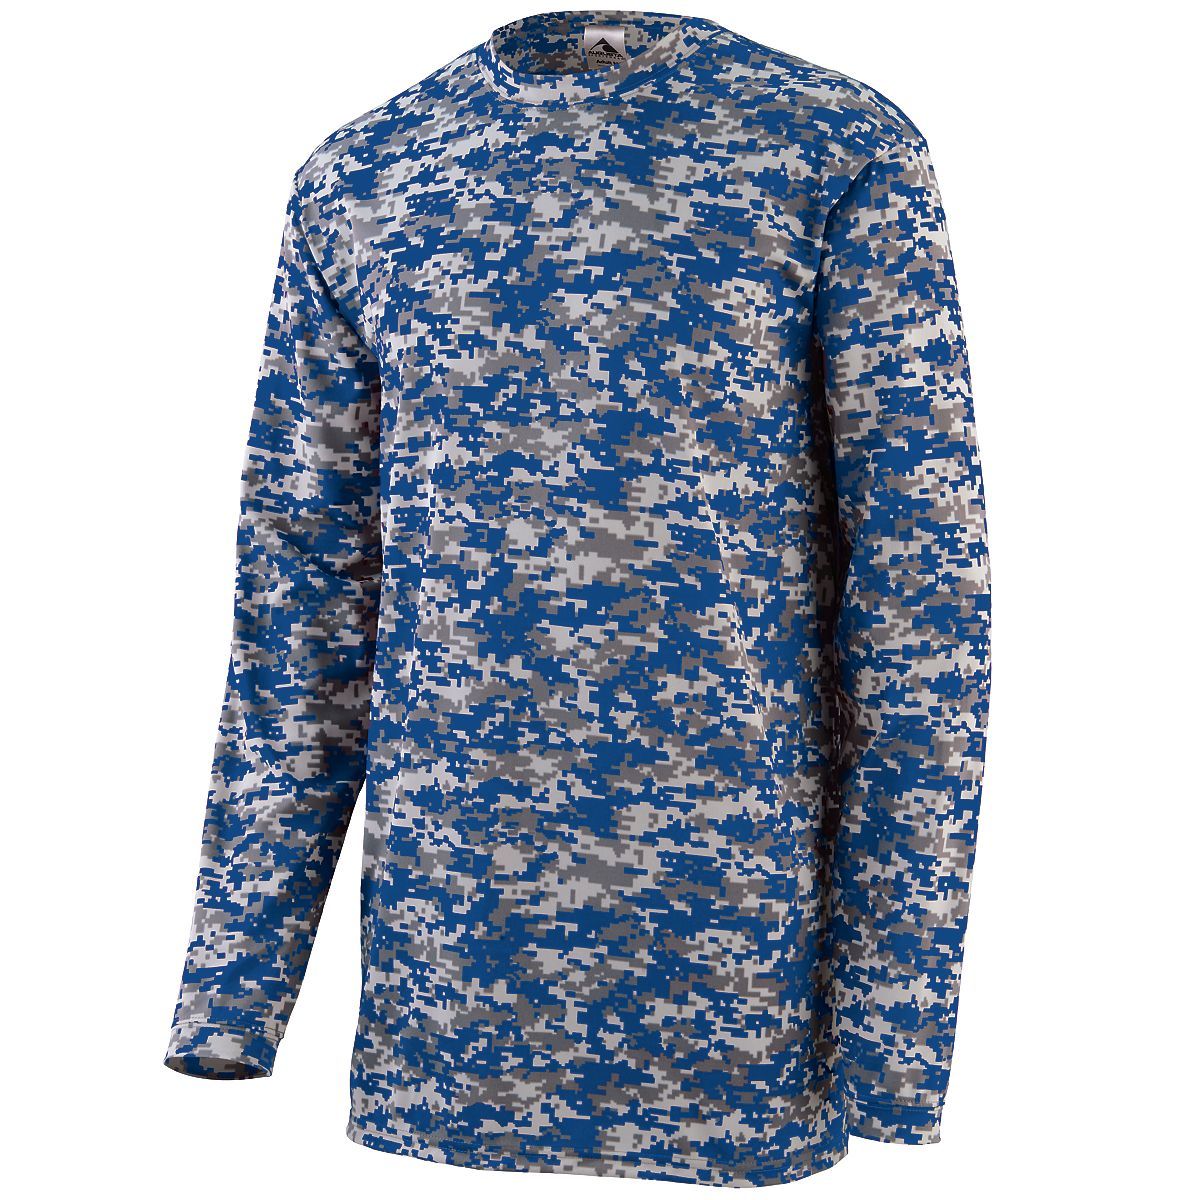 Augusta Sportswear Digi Camo Wicking Long Sleeve T-Shirt in Royal Digi  -Part of the Adult, Adult-Tee-Shirt, T-Shirts, Augusta-Products, Shirts product lines at KanaleyCreations.com